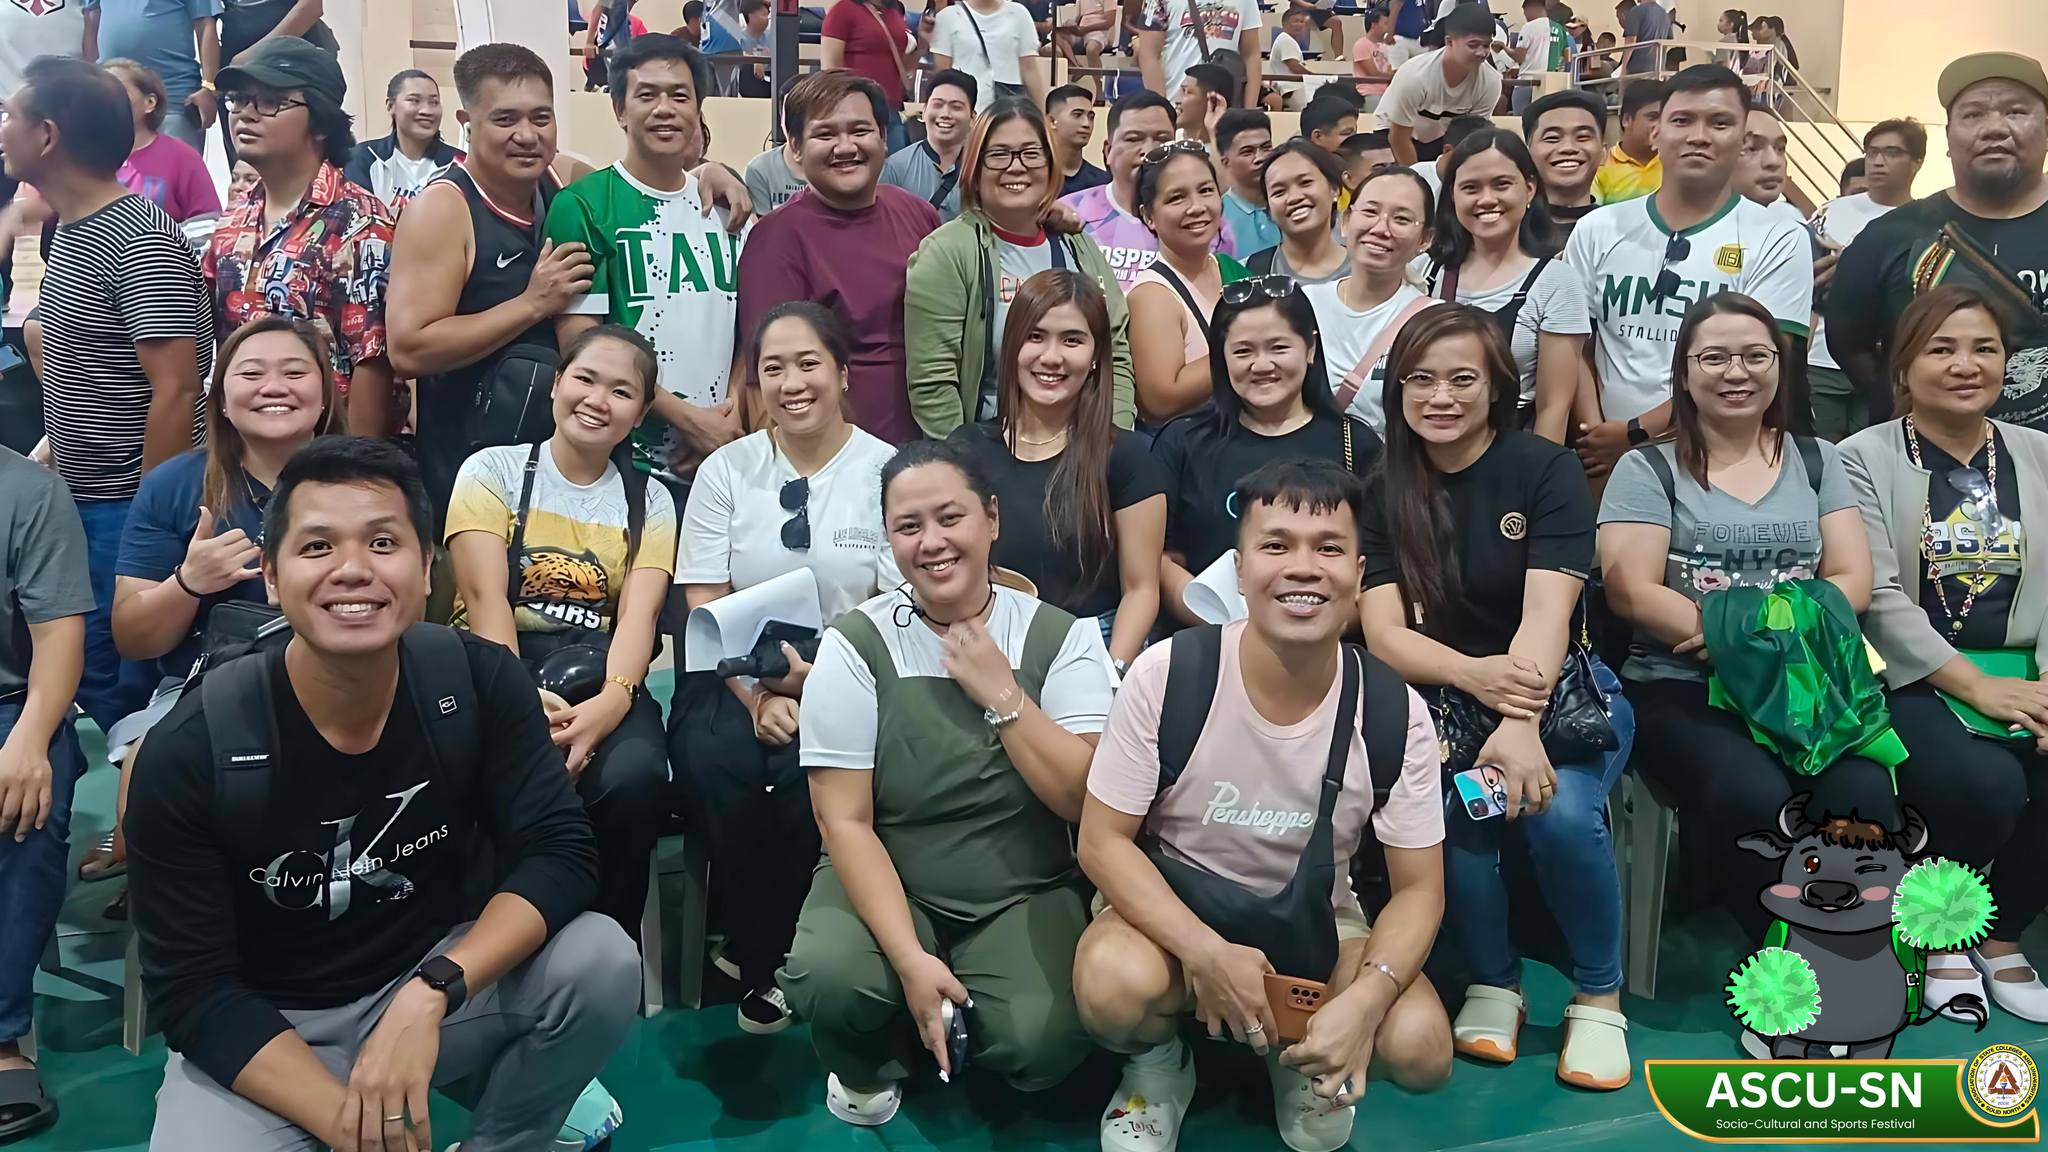 𝐂𝐀𝐏𝐓𝐔𝐑𝐄𝐃 𝐈𝐍 𝐋𝐄𝐍𝐒 | Participants from the Tarlac Agricultural University (TAU) interact with their fellow contenders during the Solidarity Meeting of the Association of Colleges and Universities - Solid North (ASCU - SN) Socio-Cultural and Sports Festival at the Isabela State University (ISU) Amphitheater on 1 July